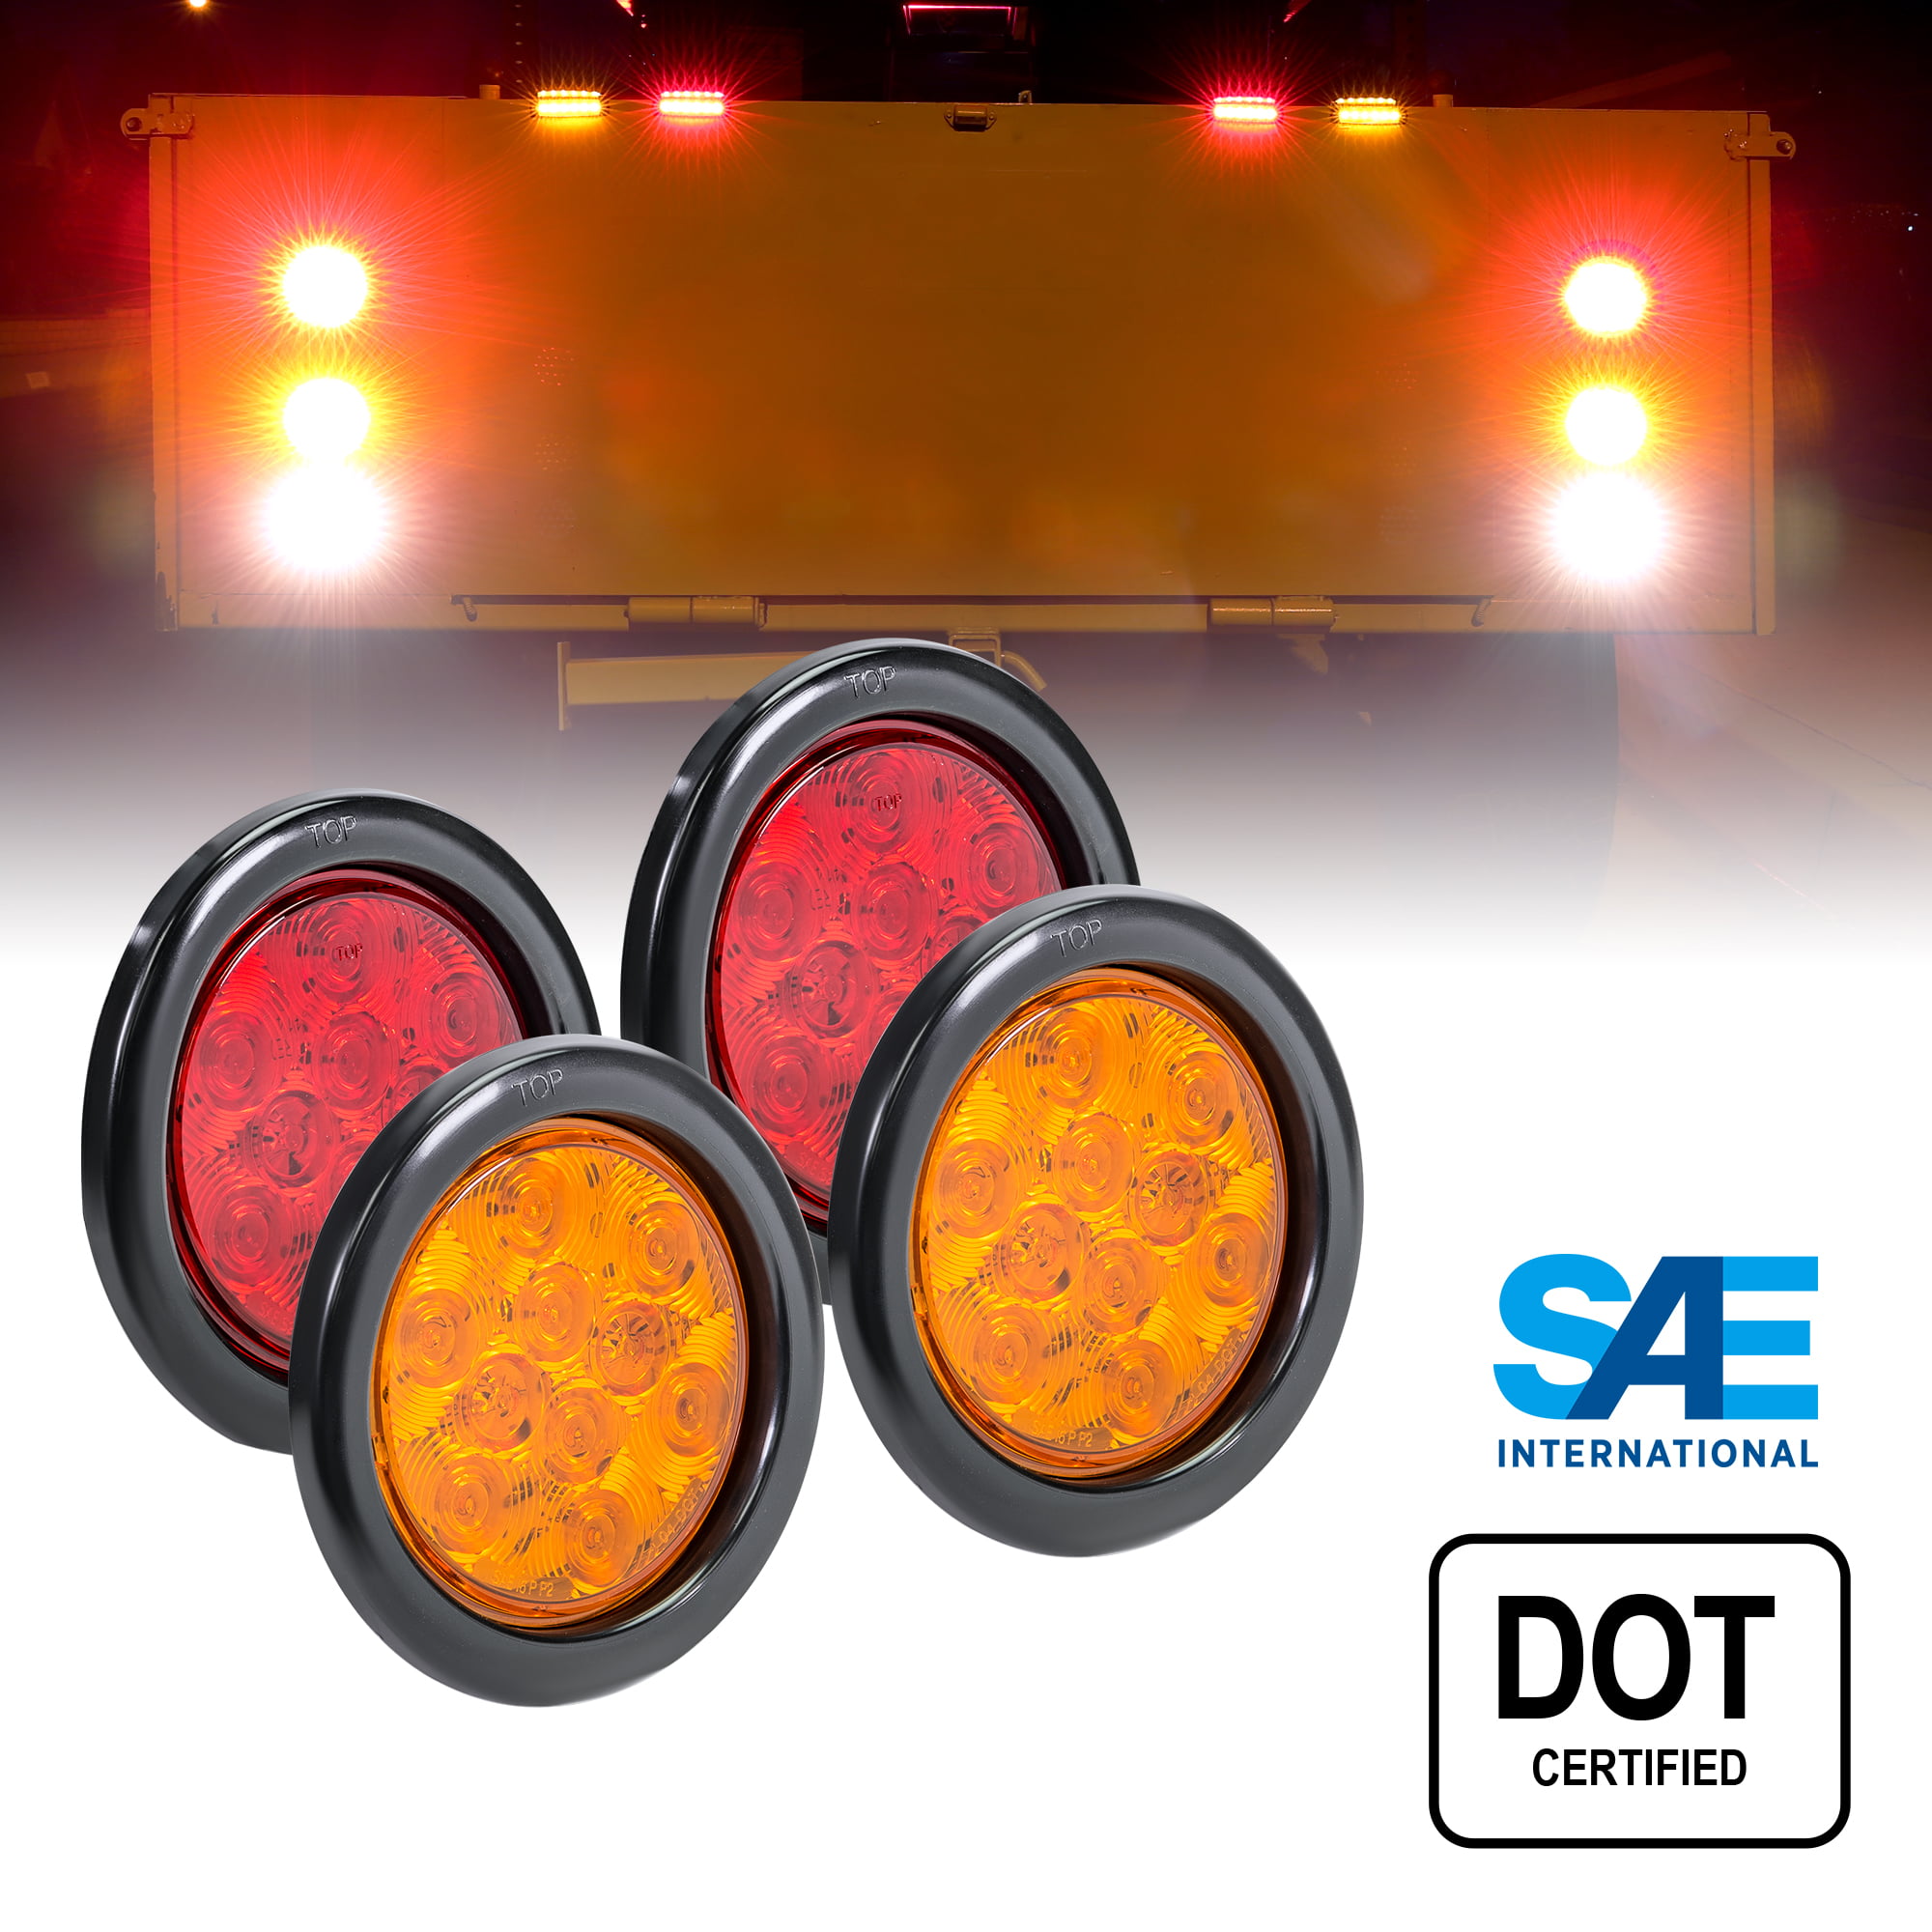 2 Amber 4" Round DOT LED Trailer Tail Light Kit w/ Grommet & Plug Details about   2 Red 